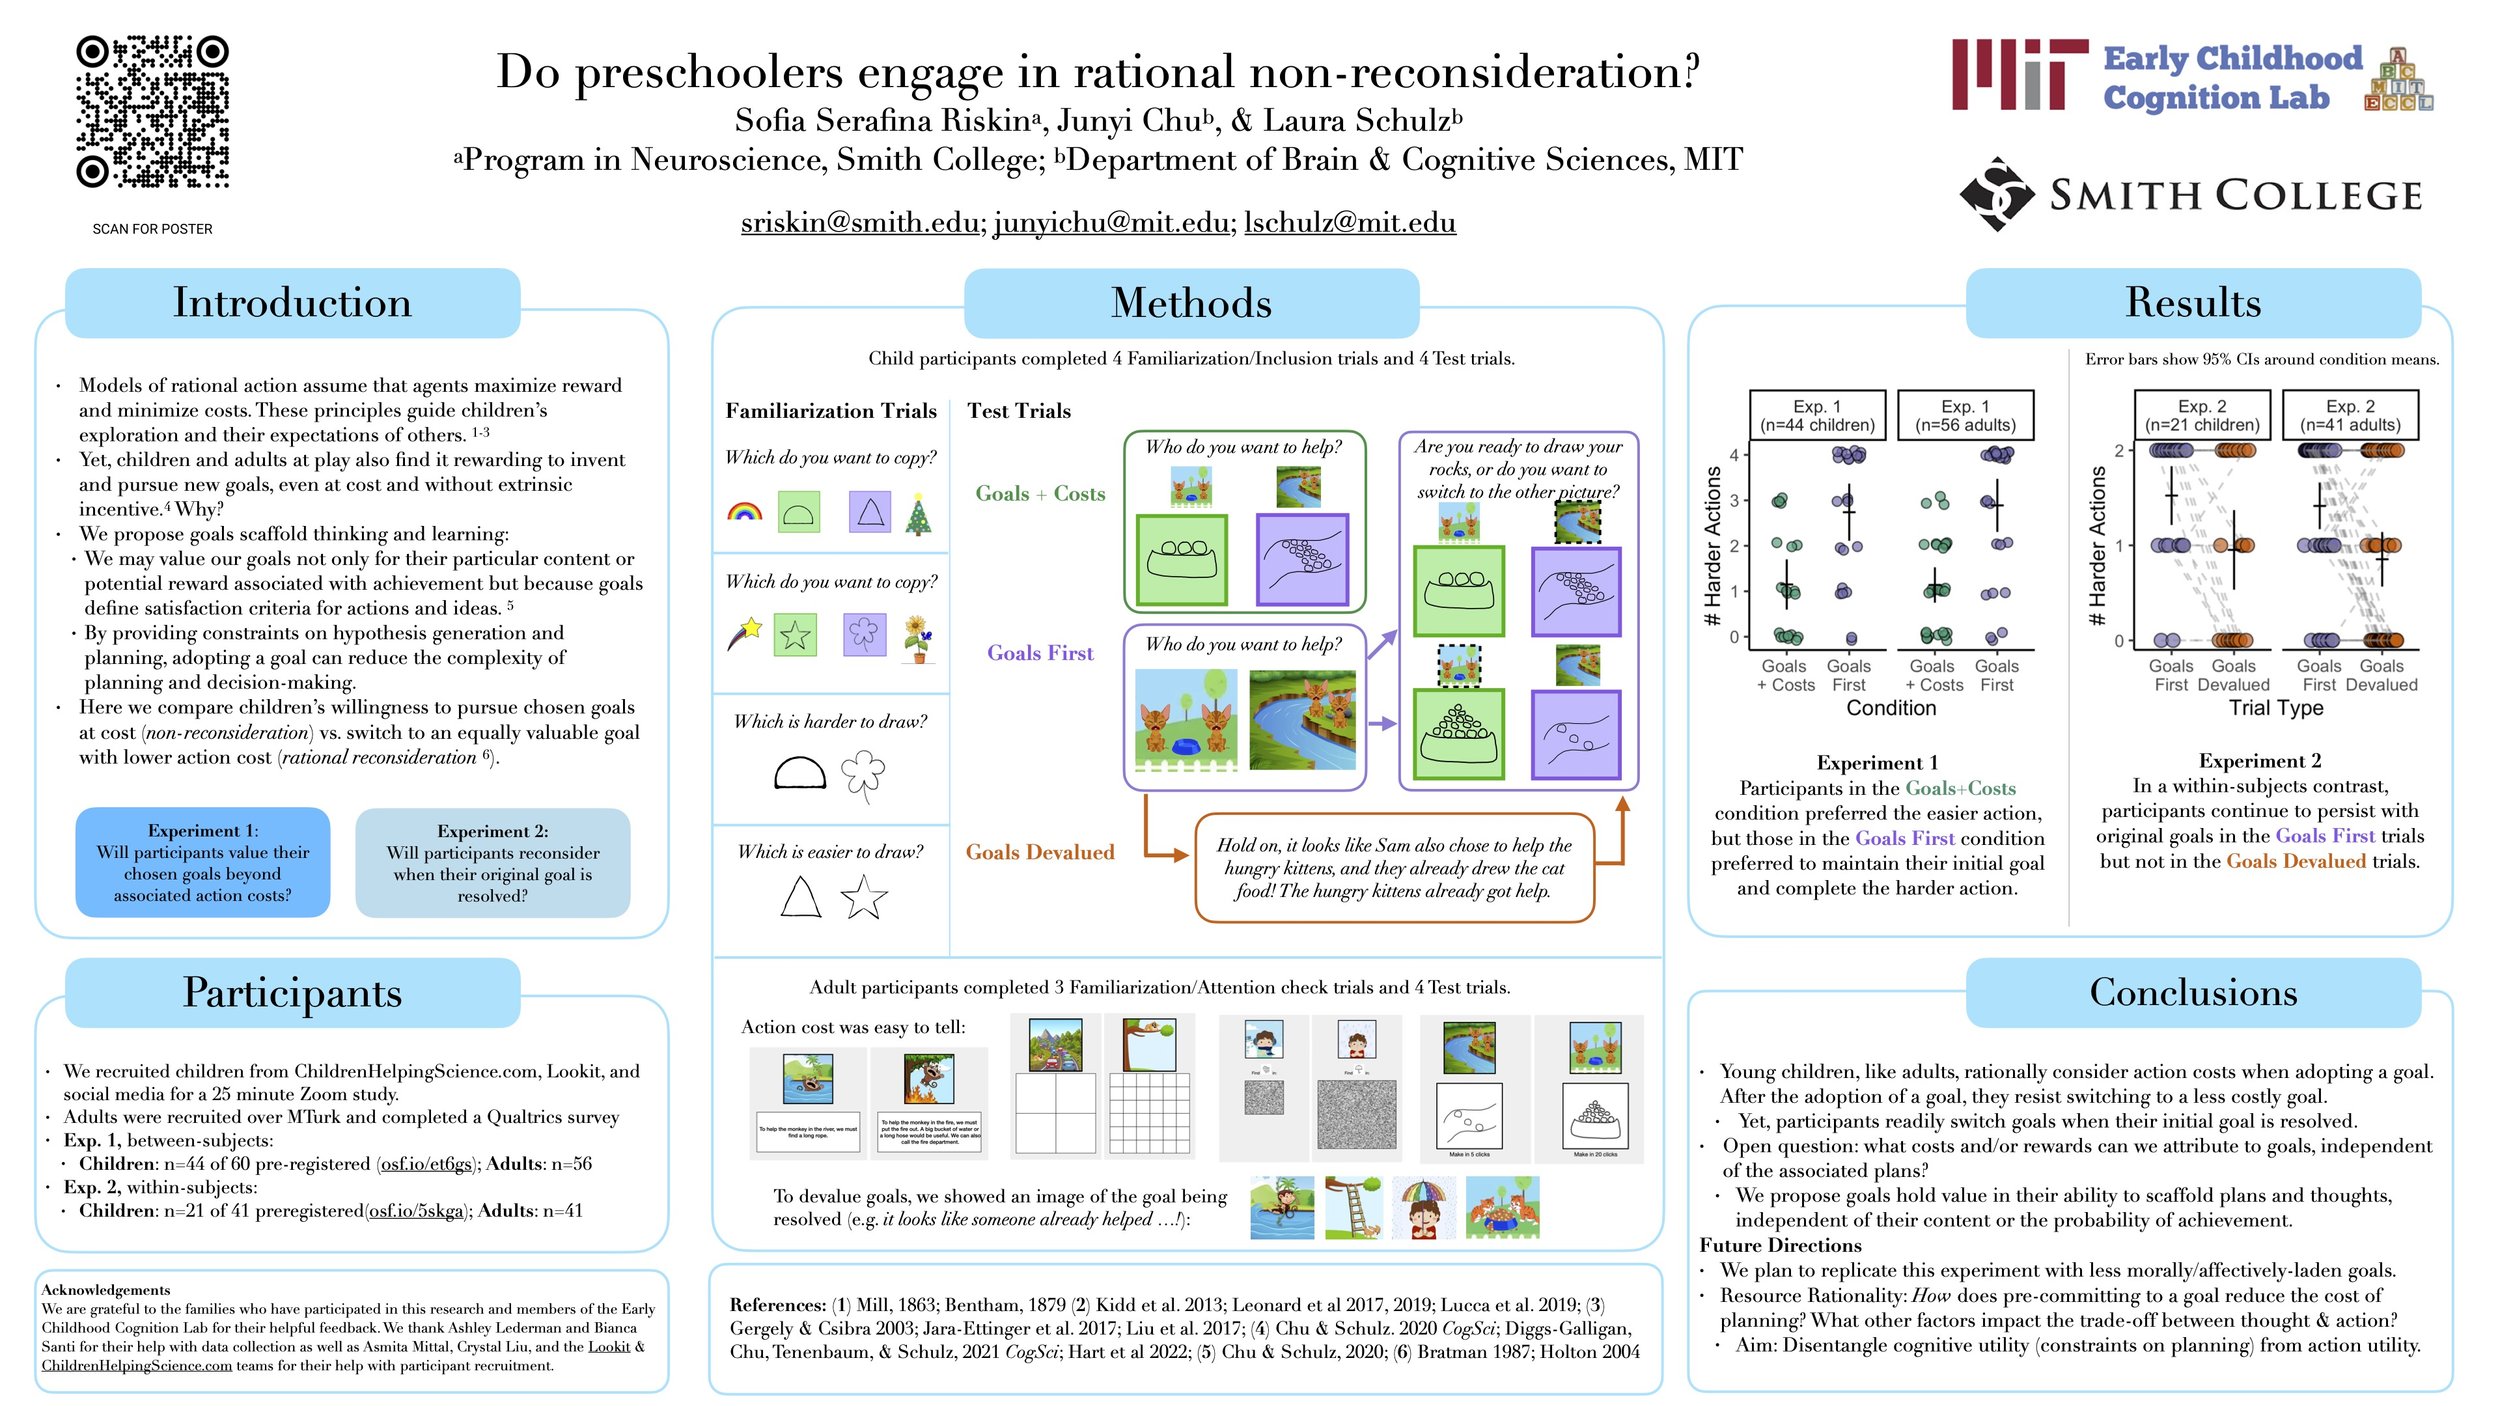   Riskin, S. S. , Chu, J., &amp; Schulz, L. E. (2022, April).  Do preschoolers engage in rational non-reconsideration?  Poster presented at the 2022 Cognitive Development Society Biennial Conference, Madison, WI. 